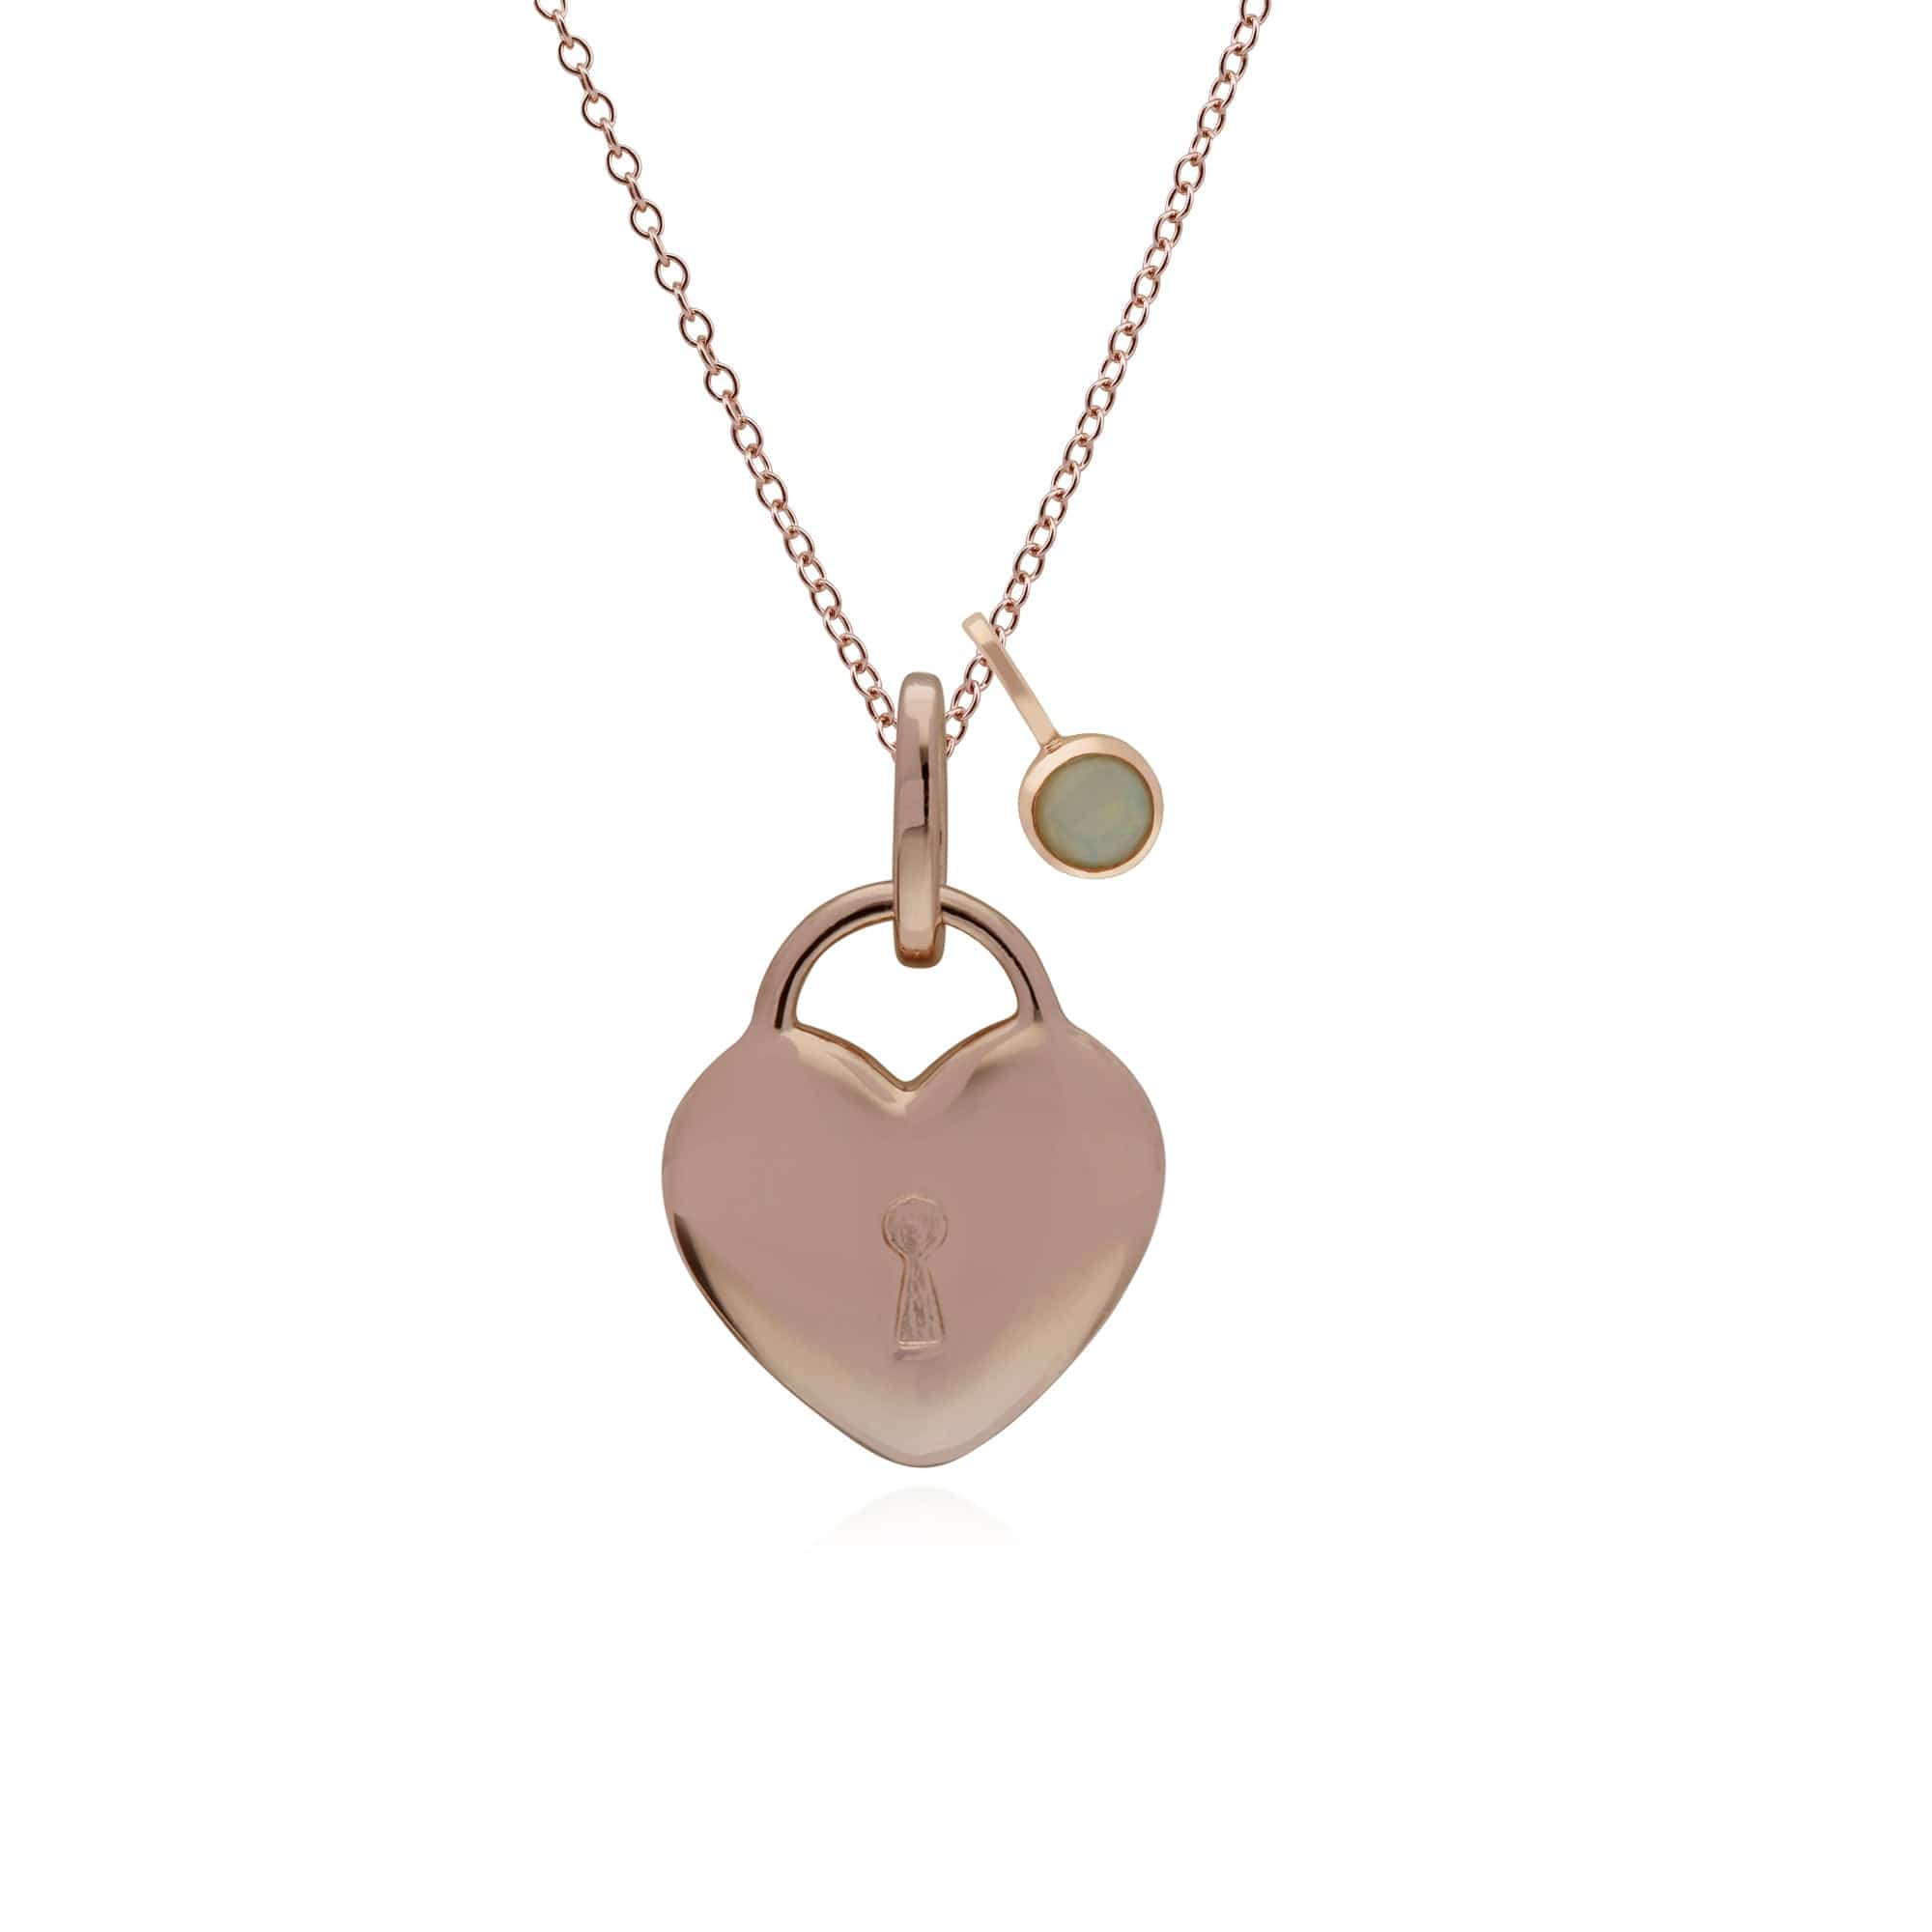 270P025903925-270P026901925 Classic Plain Heart Lock Pendant & Opal Charm in Rose Gold Plated 925 Sterling Silver 1